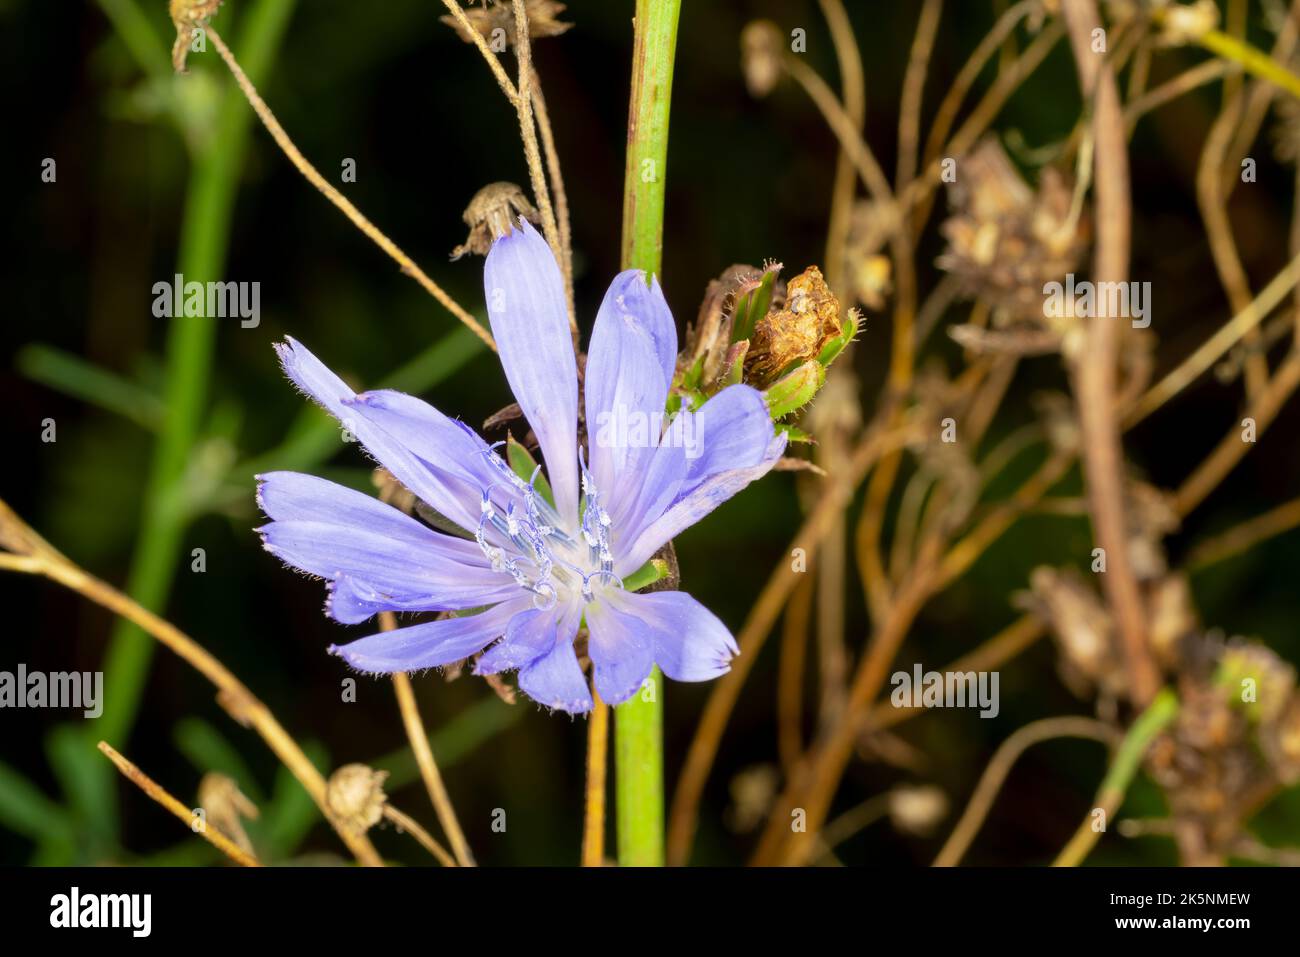 Common chicory, a species of chichorium. Violet flower with green and brown blurred background. Macro photo. Stock Photo